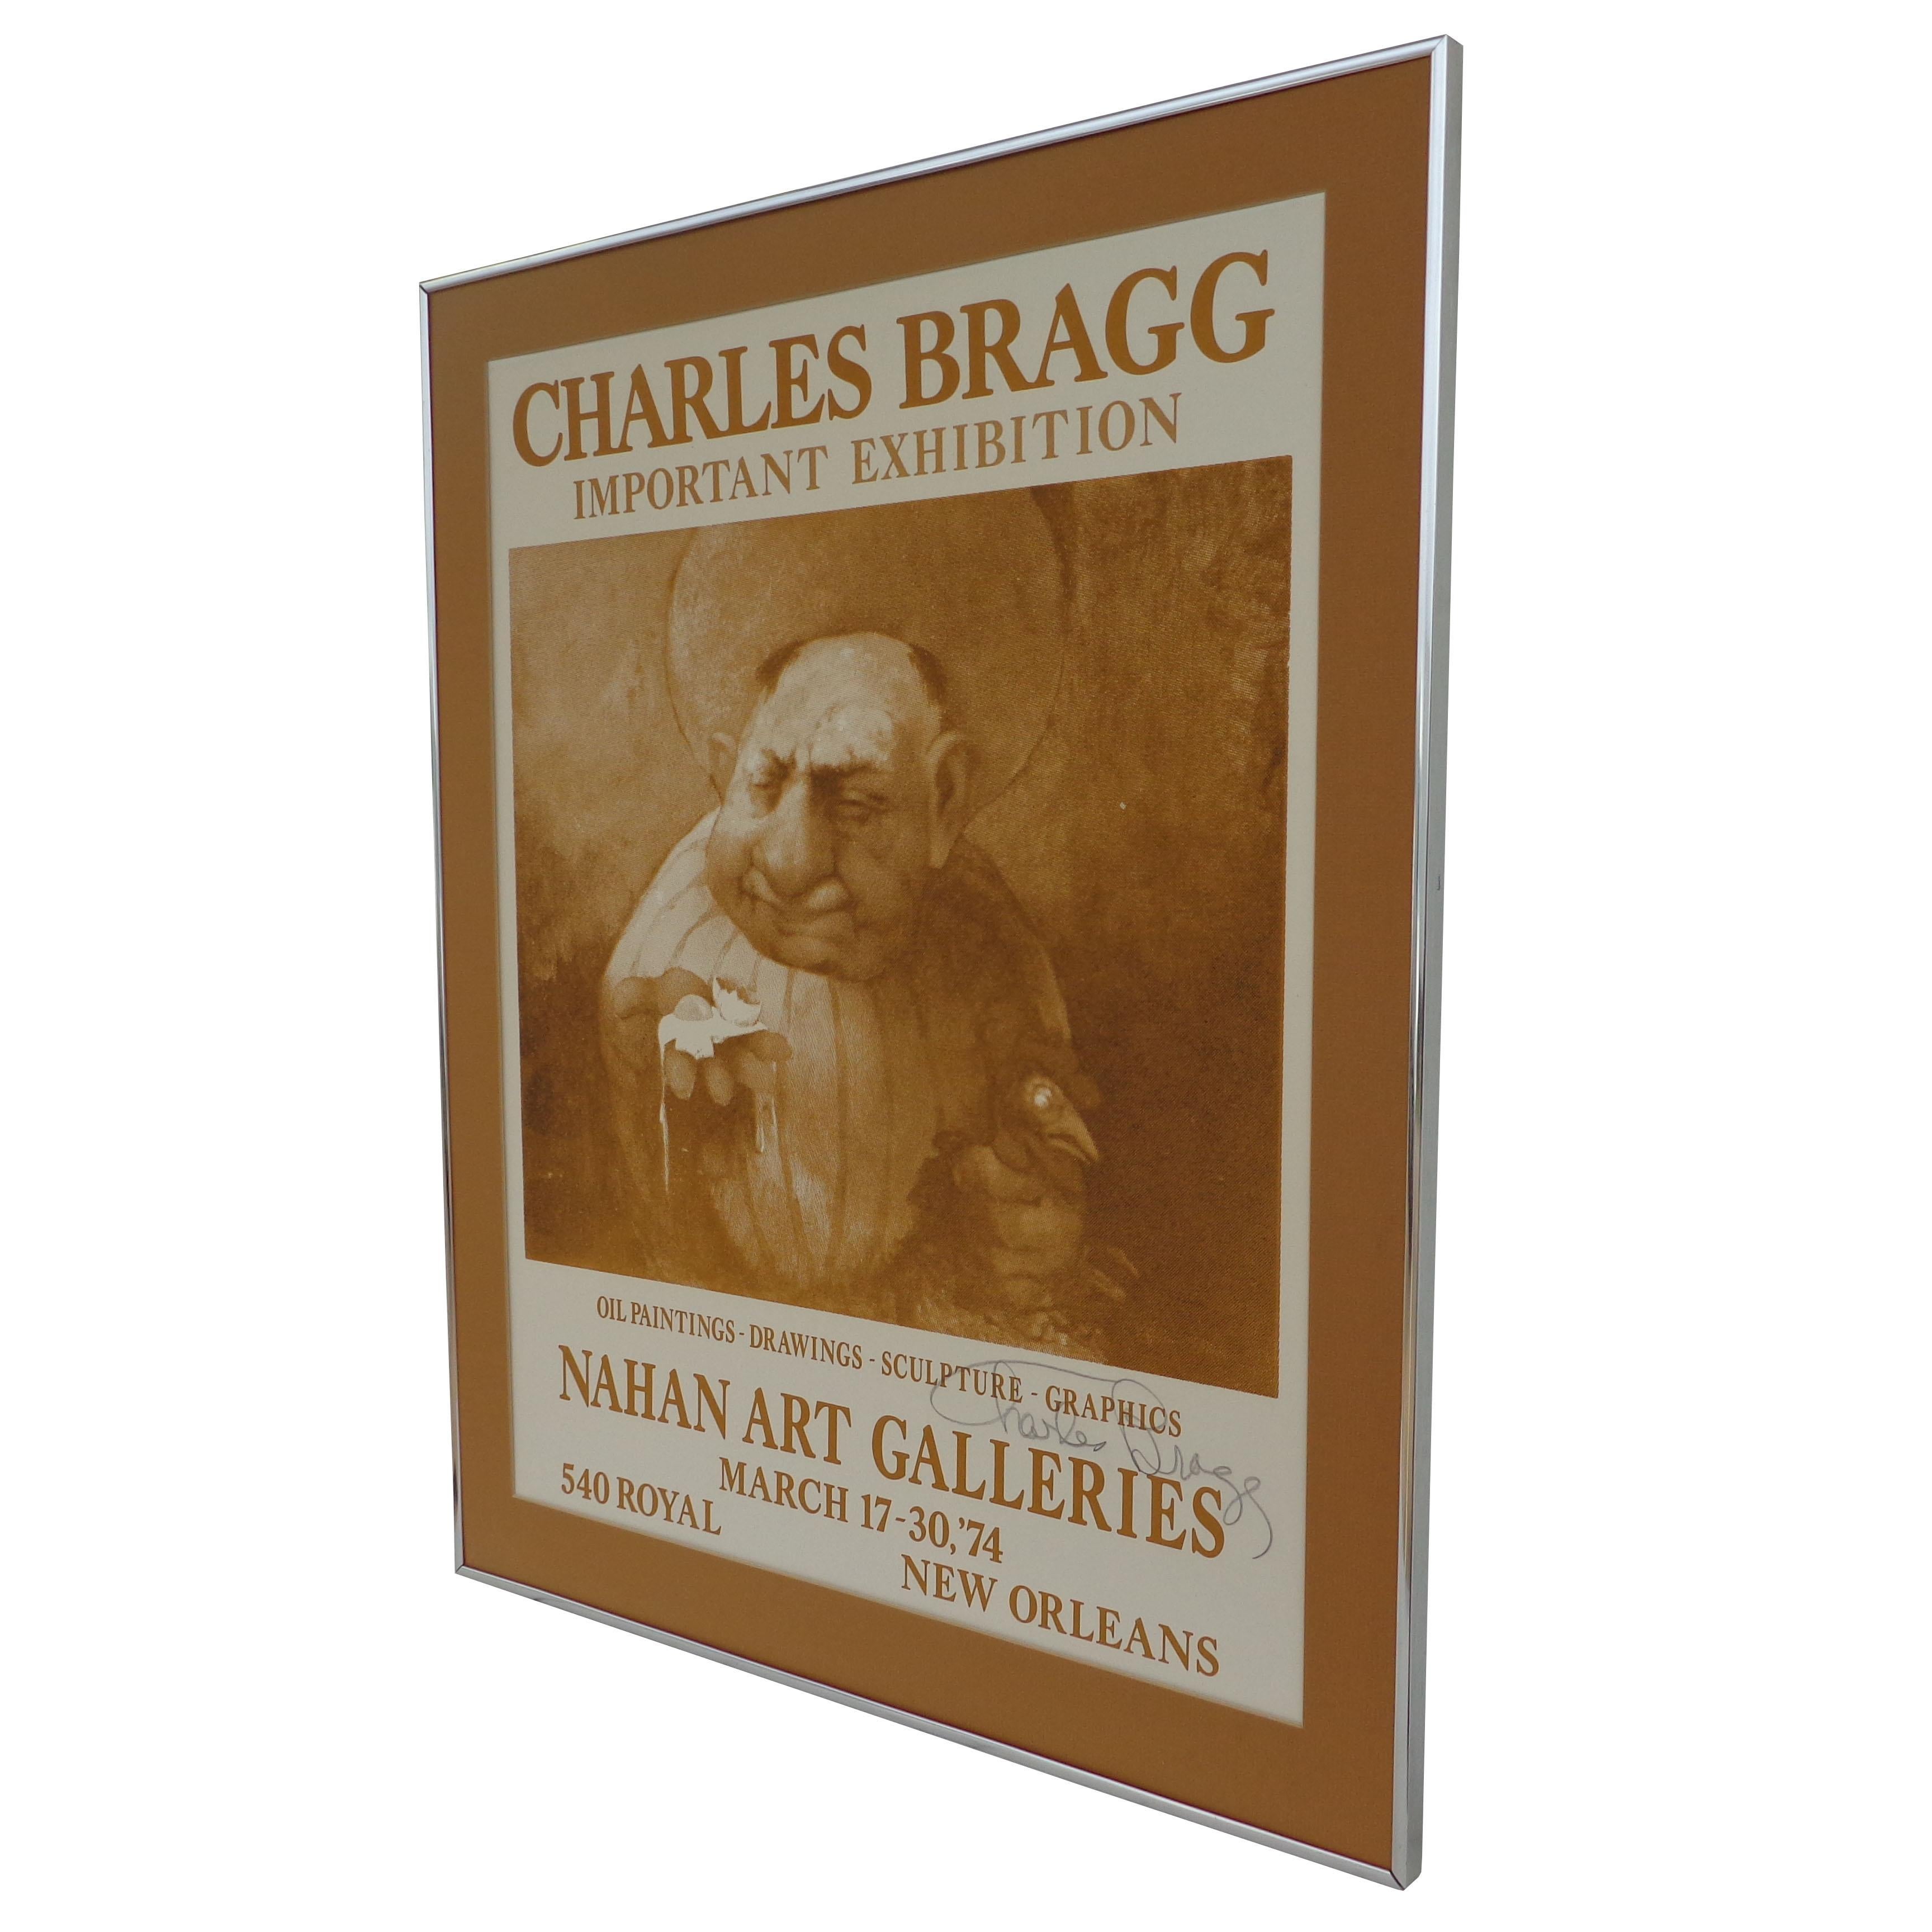 Signed Charles Bragg Poster,
1974

From an exhibition in New Orleans. Can ship unframed. The poster has no glass but can be added.